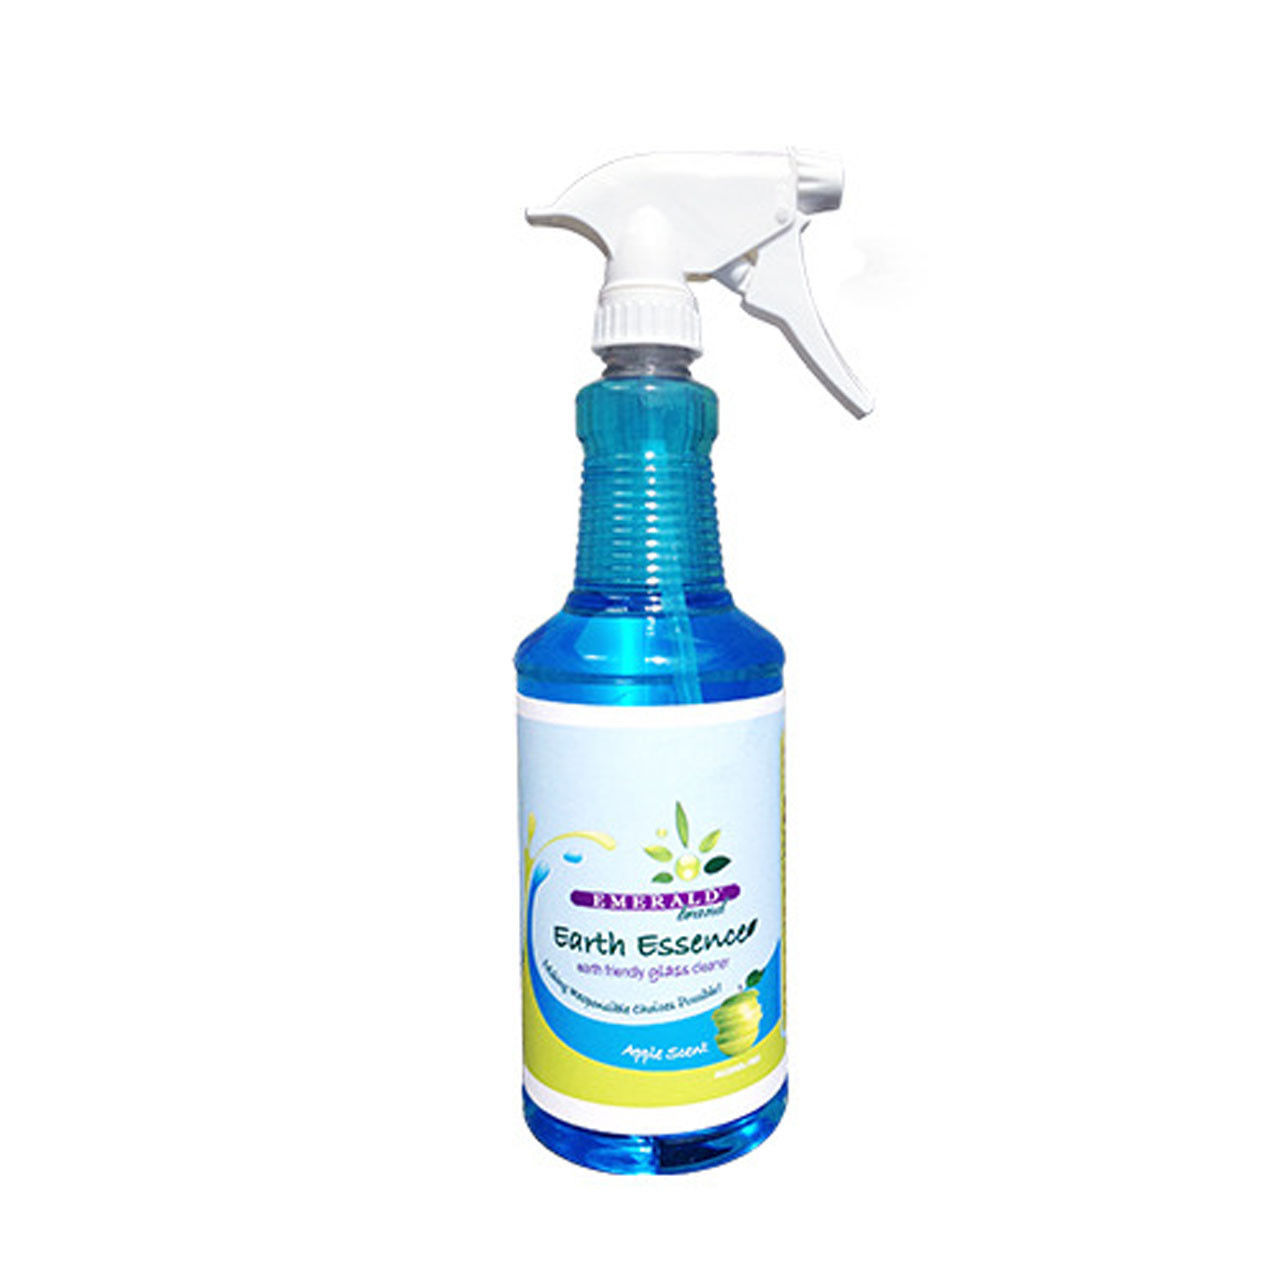 Is the Emerald Earth Essence Glass Cleaner recognized by any environmental agency?